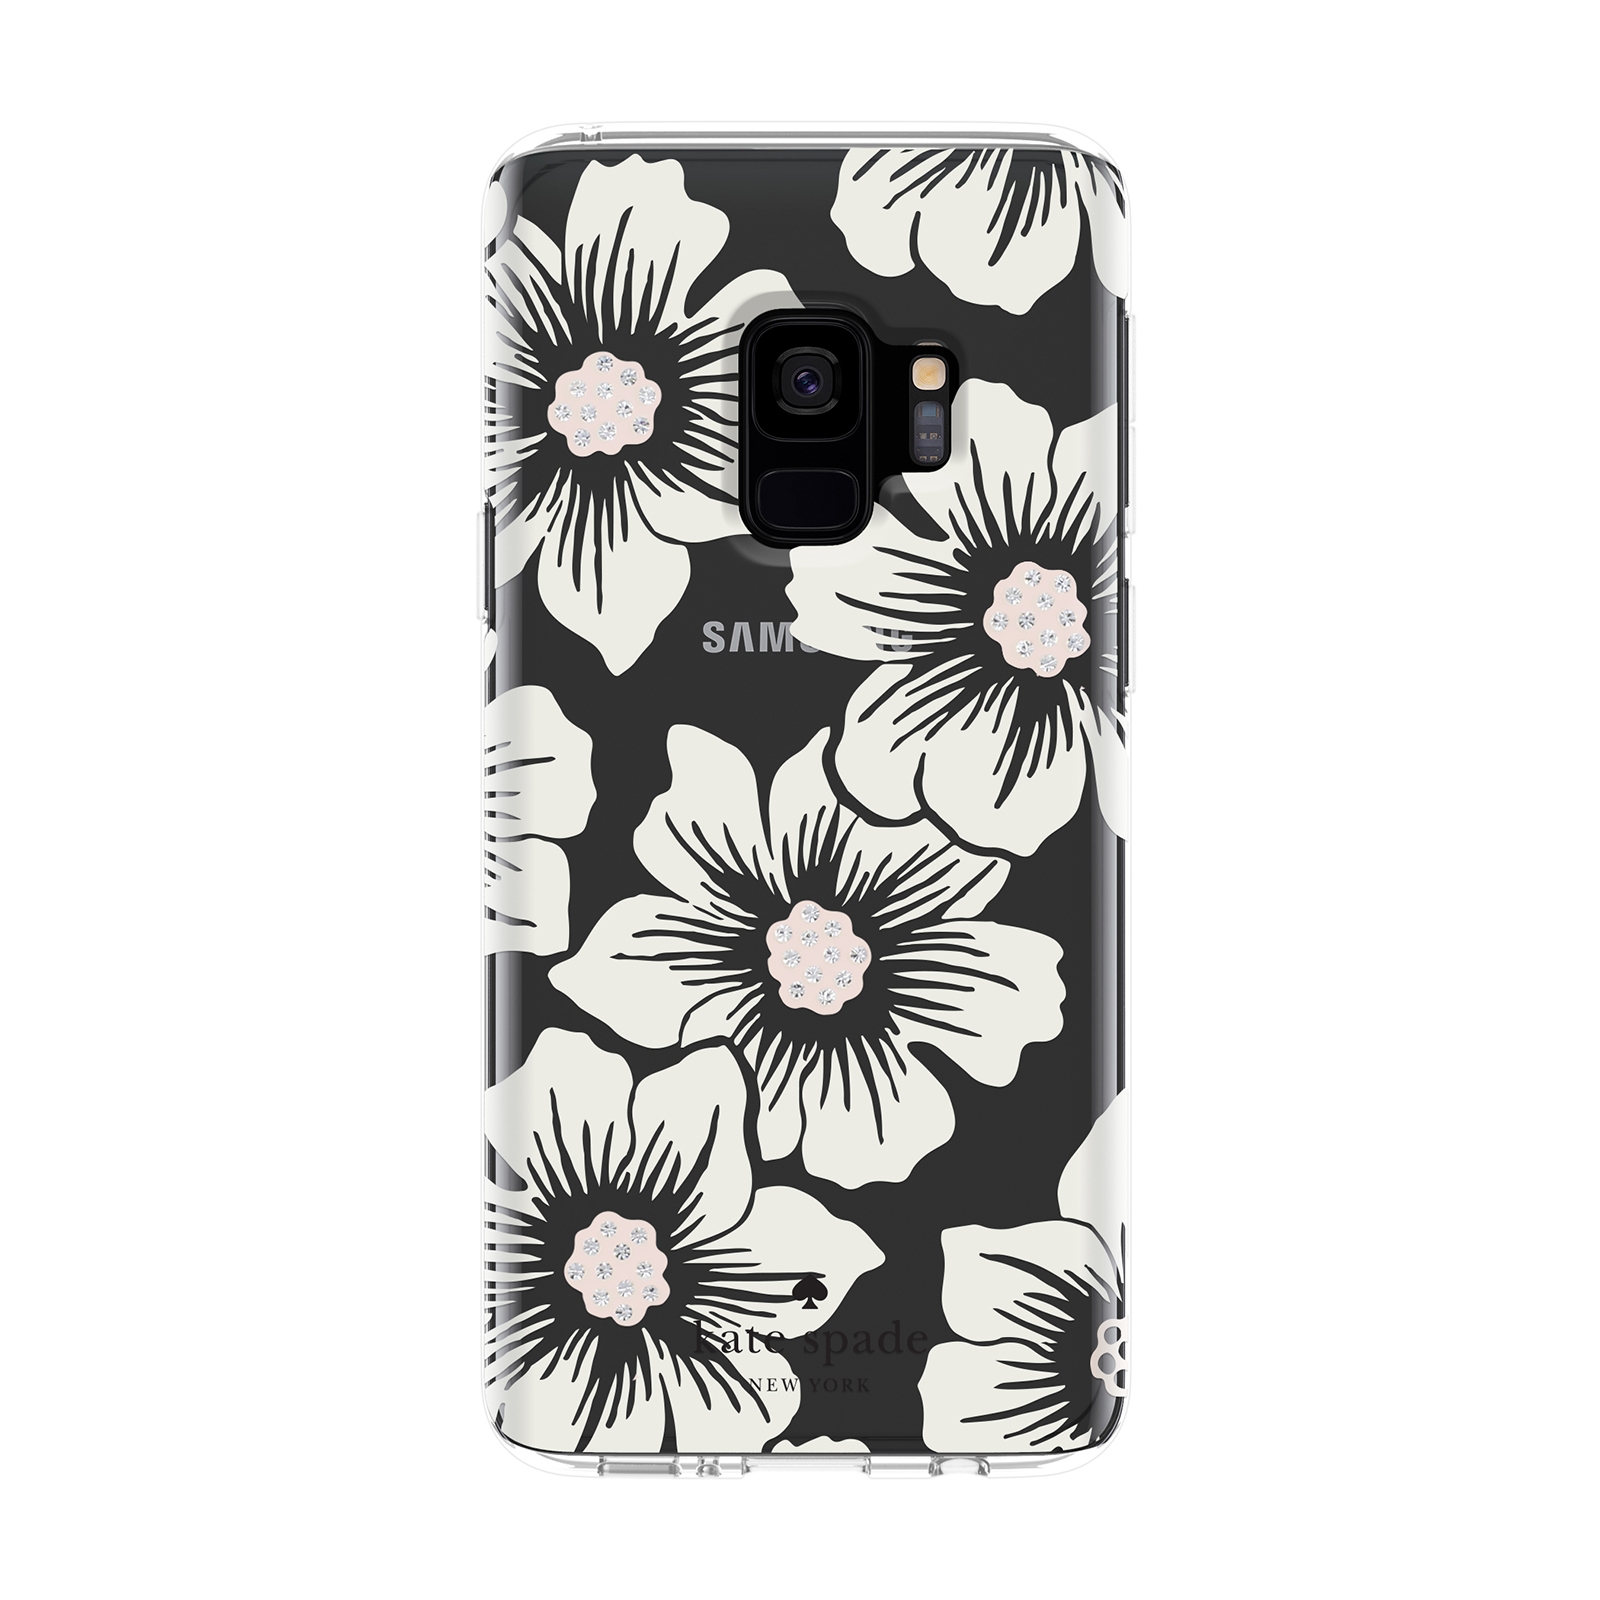 Kate Spade Protective Hardshell Case for Galaxy S9, Hollyhock Mobile  Accessories - KSSA-041-HHCCS | Samsung US